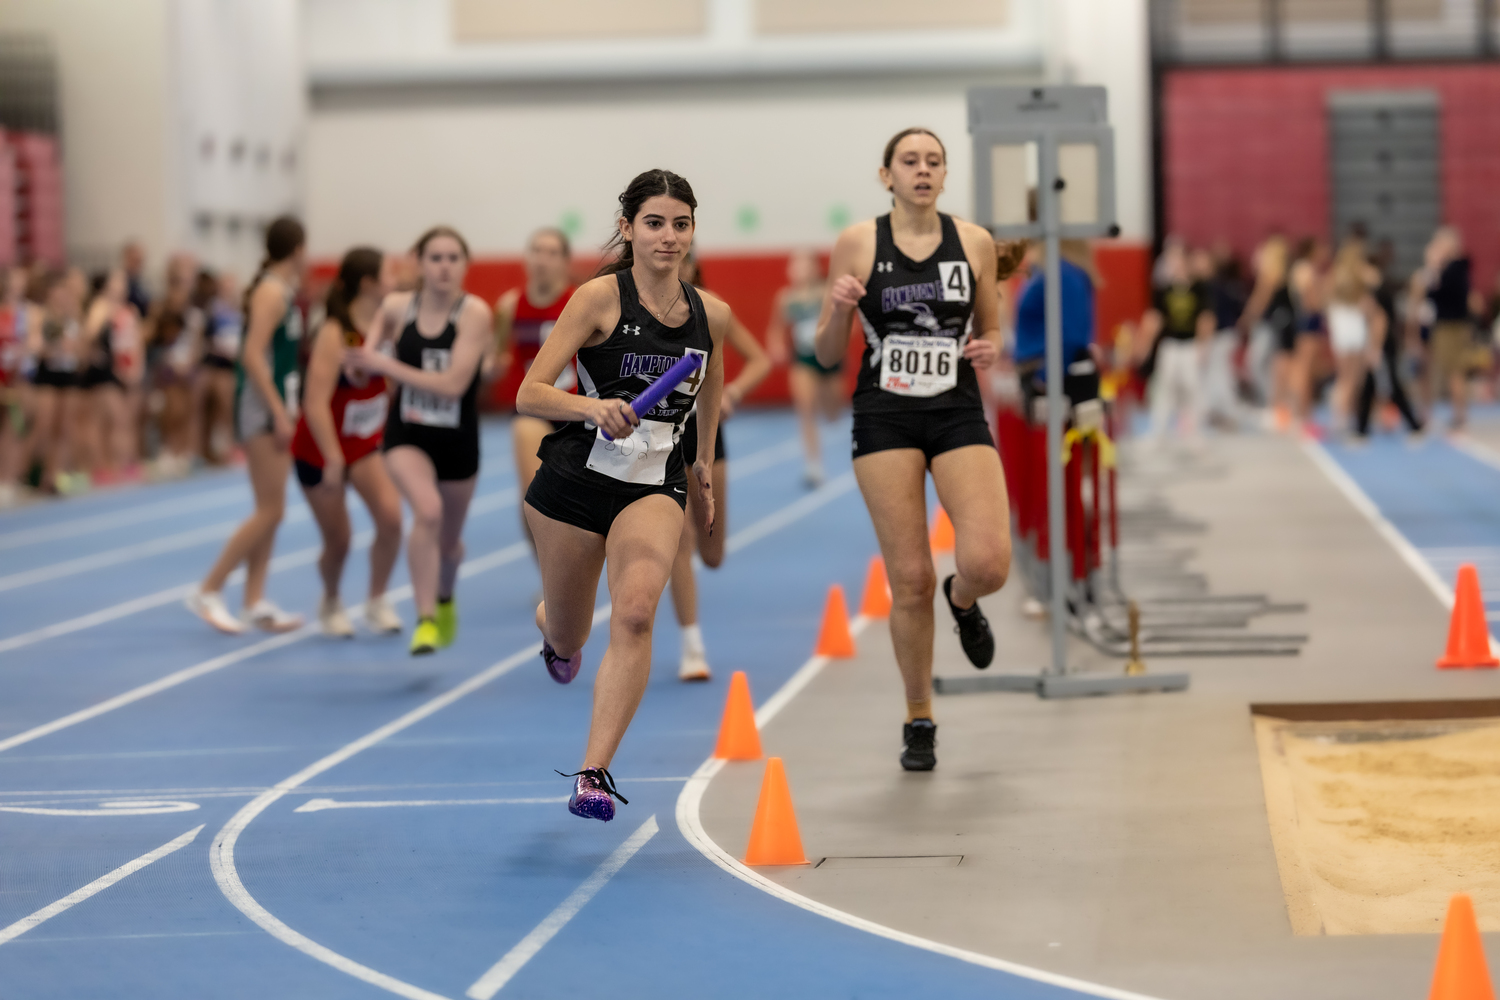 Izzy Ospitale takes off after taking the baton from Leah Fassino in the 4x200-meter relay.   RON ESPOSITO